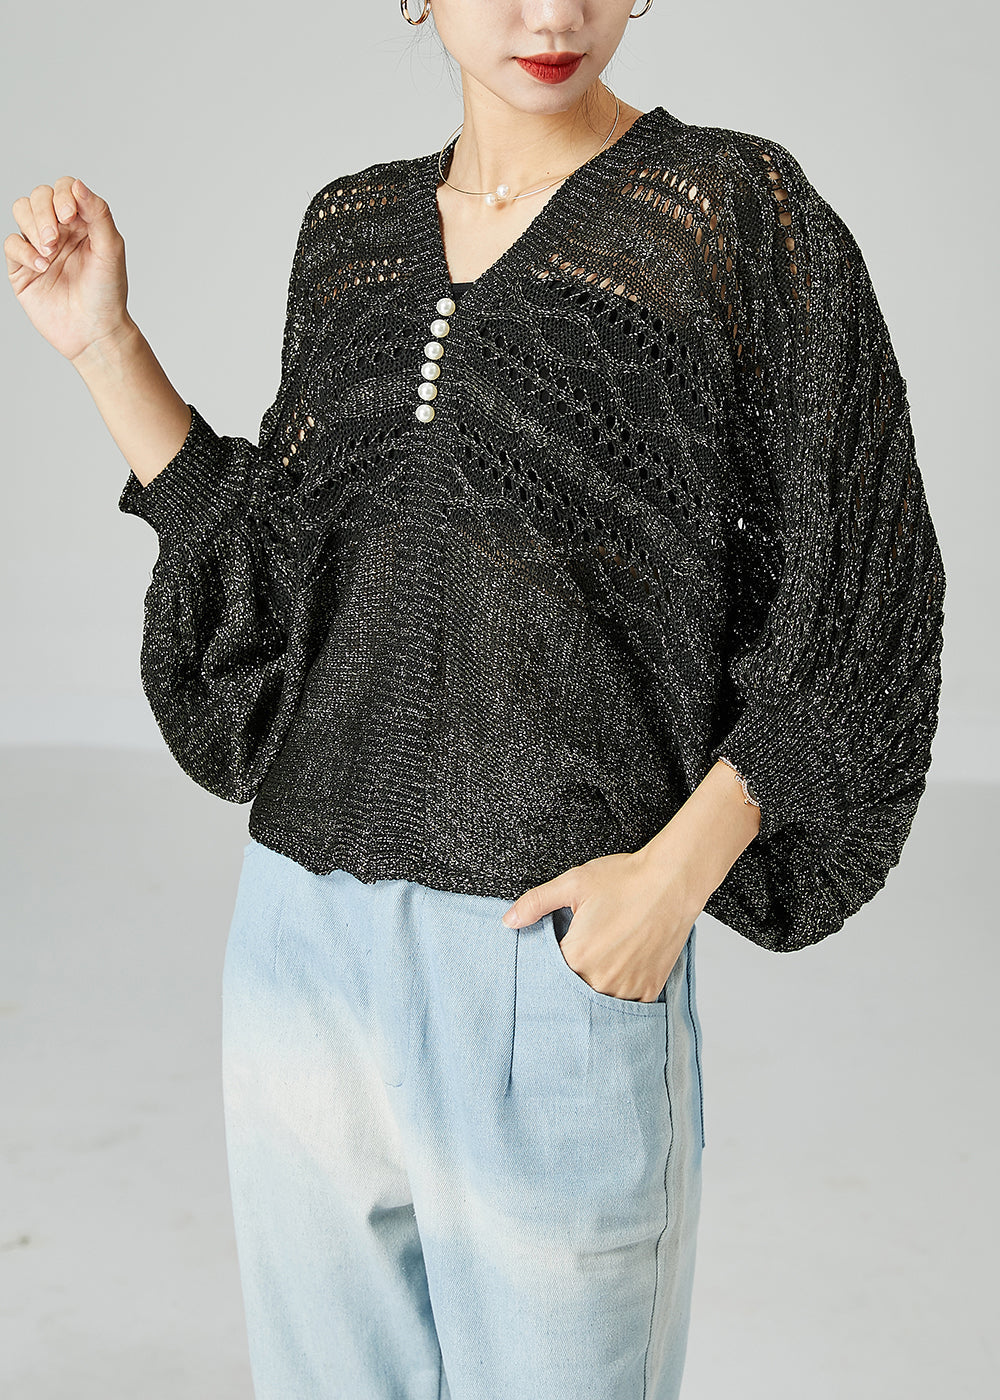 Modern Grey Oversized Hollow Out Knit Tops Batwing Sleeve LY2422 - fabuloryshop